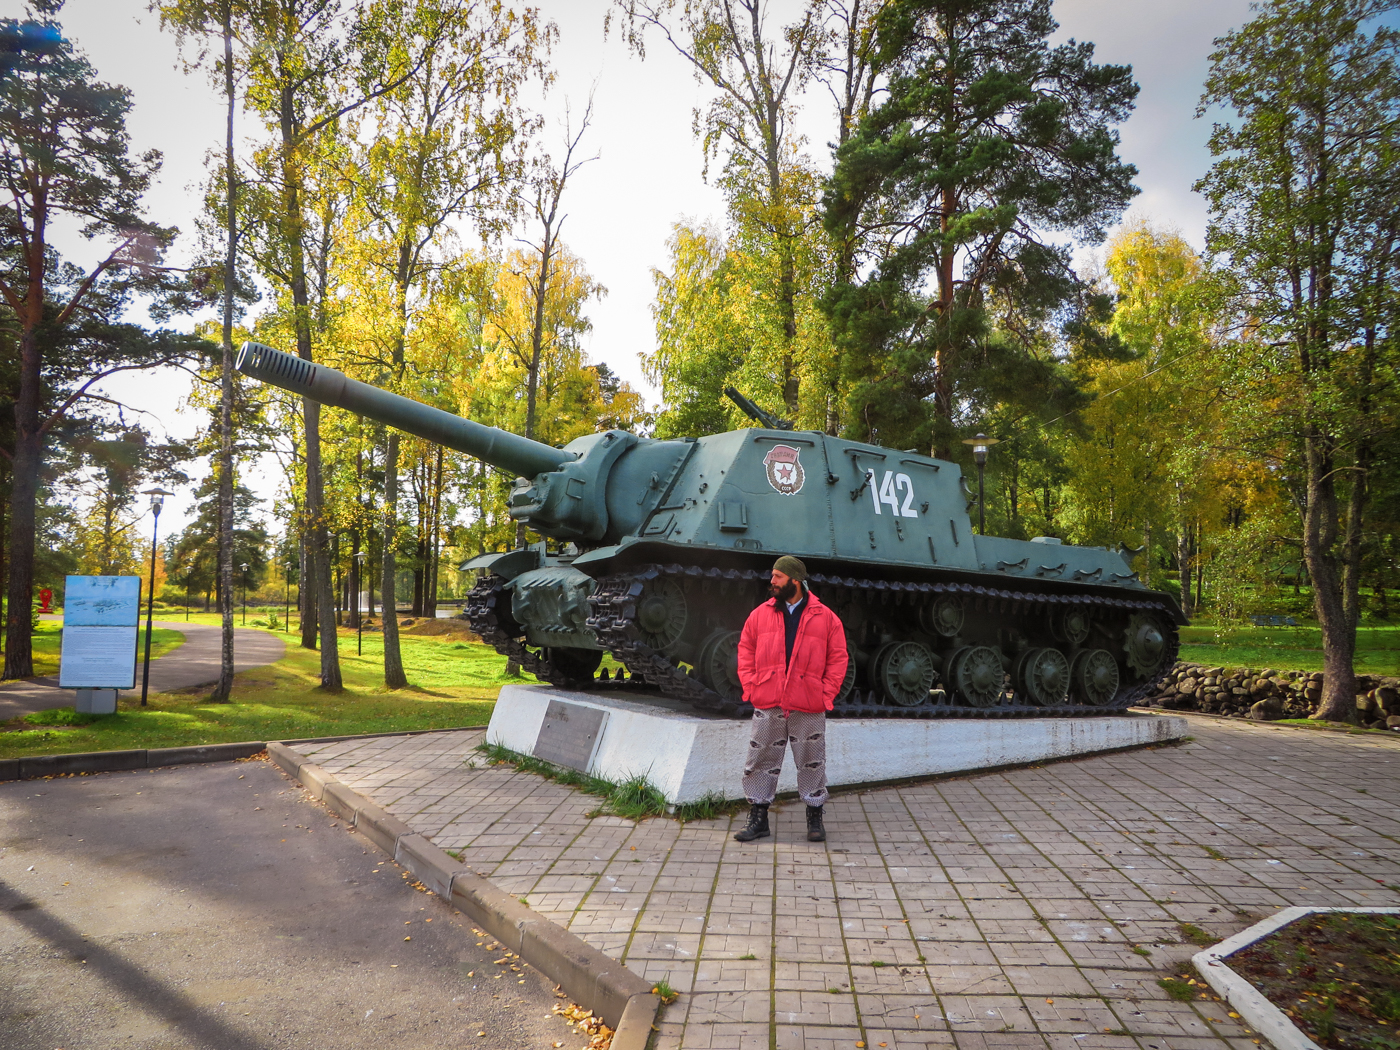 Tiago in front of a world war II tank in a forest in Russia